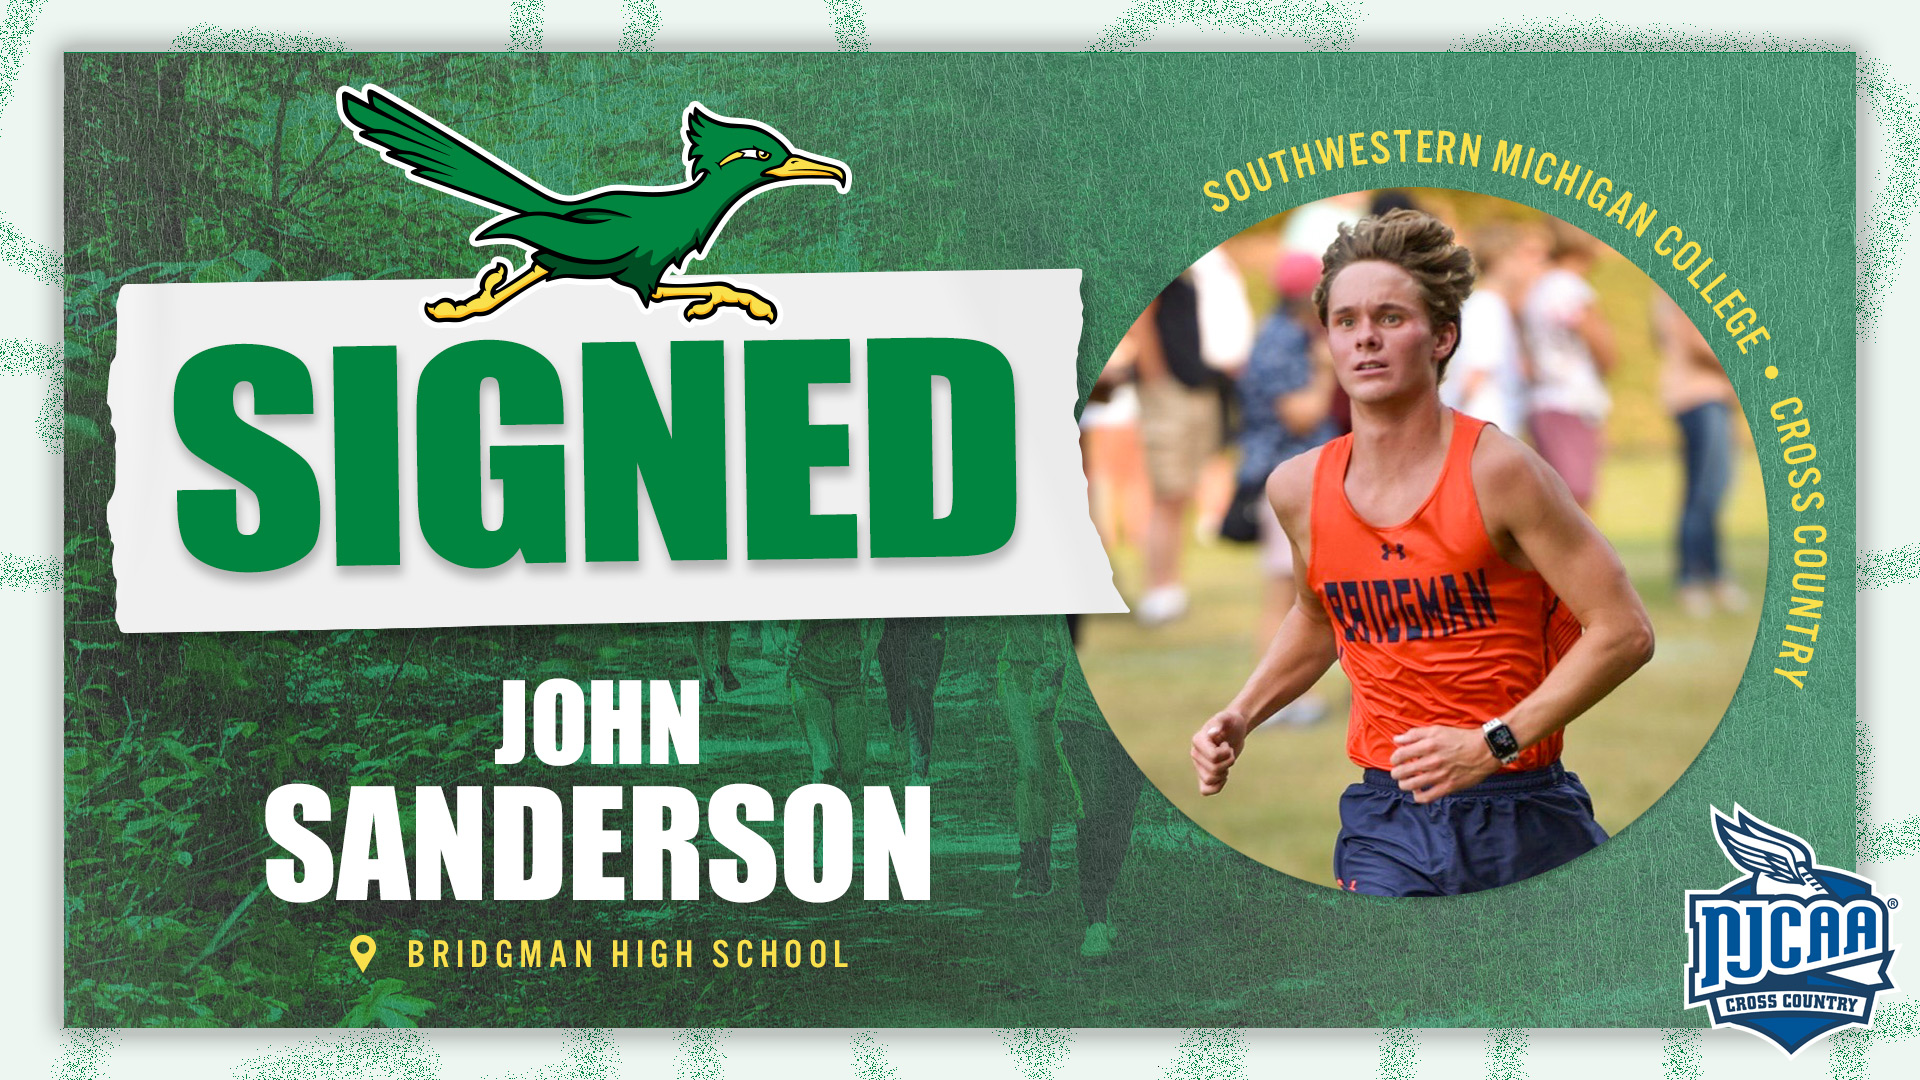 John Sanderson Signs with the Roadrunners